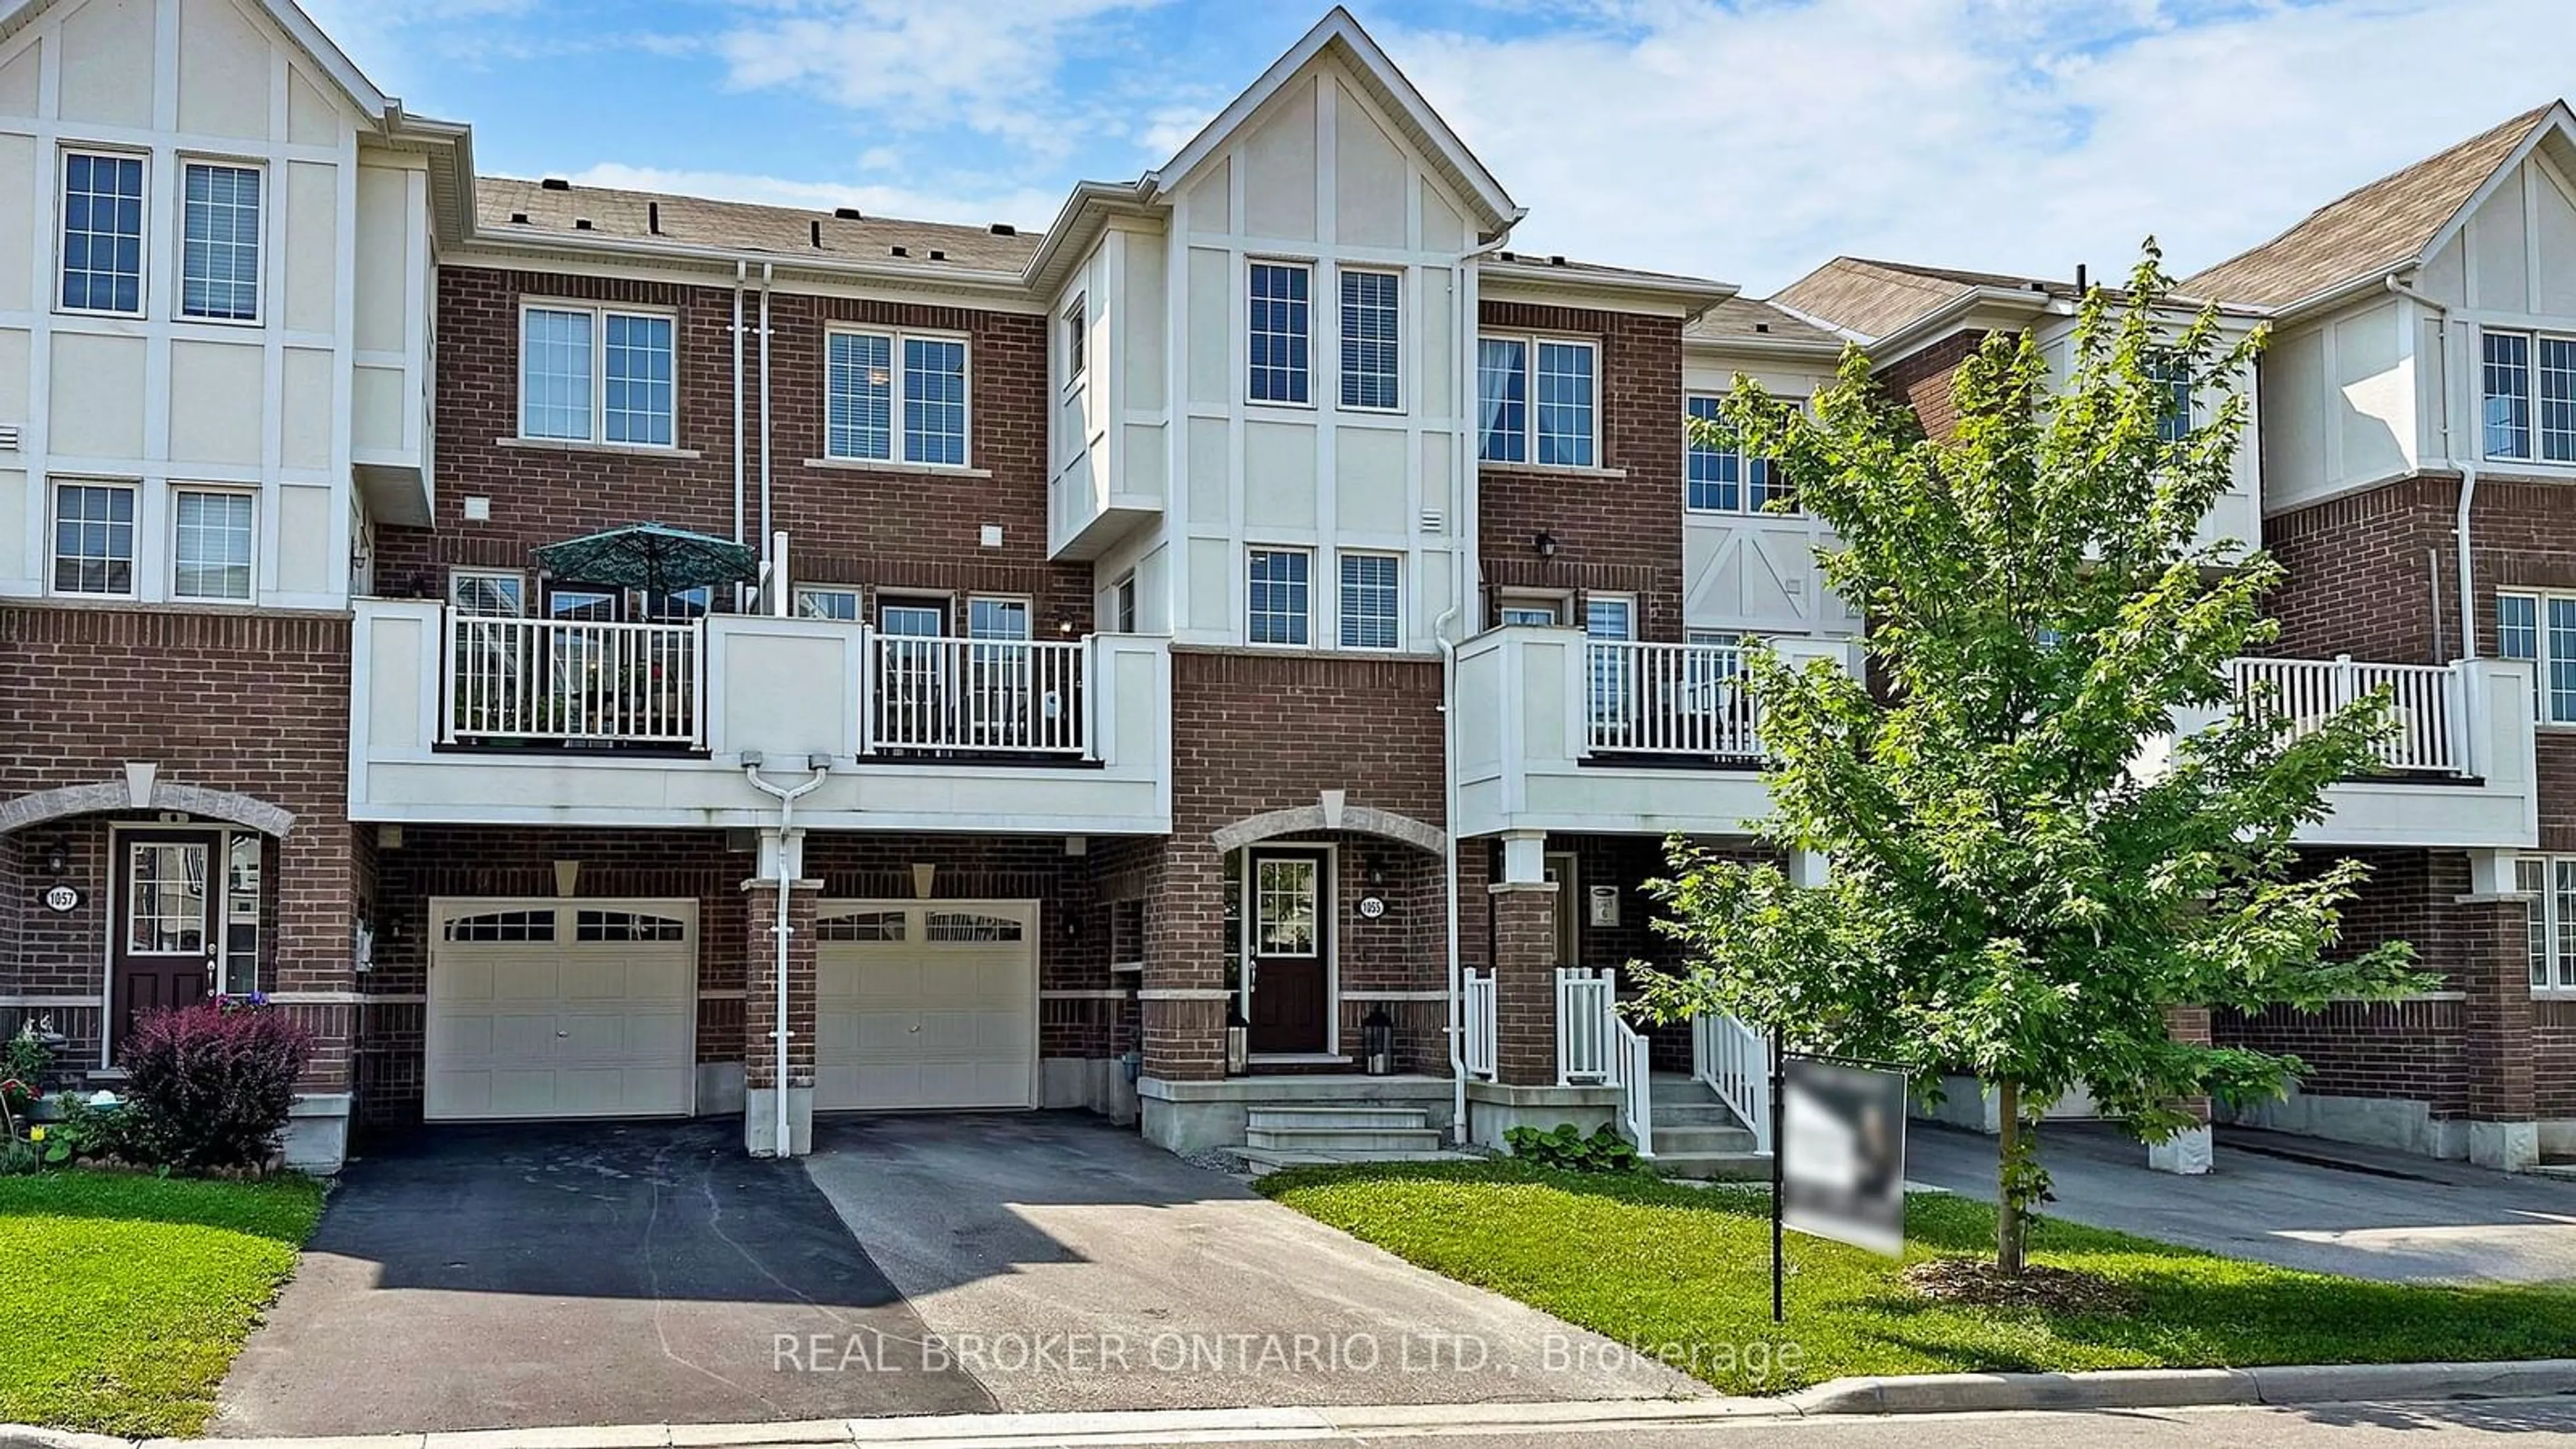 A pic from exterior of the house or condo for 1055 Clipper Lane, Pickering Ontario L1X 0E9